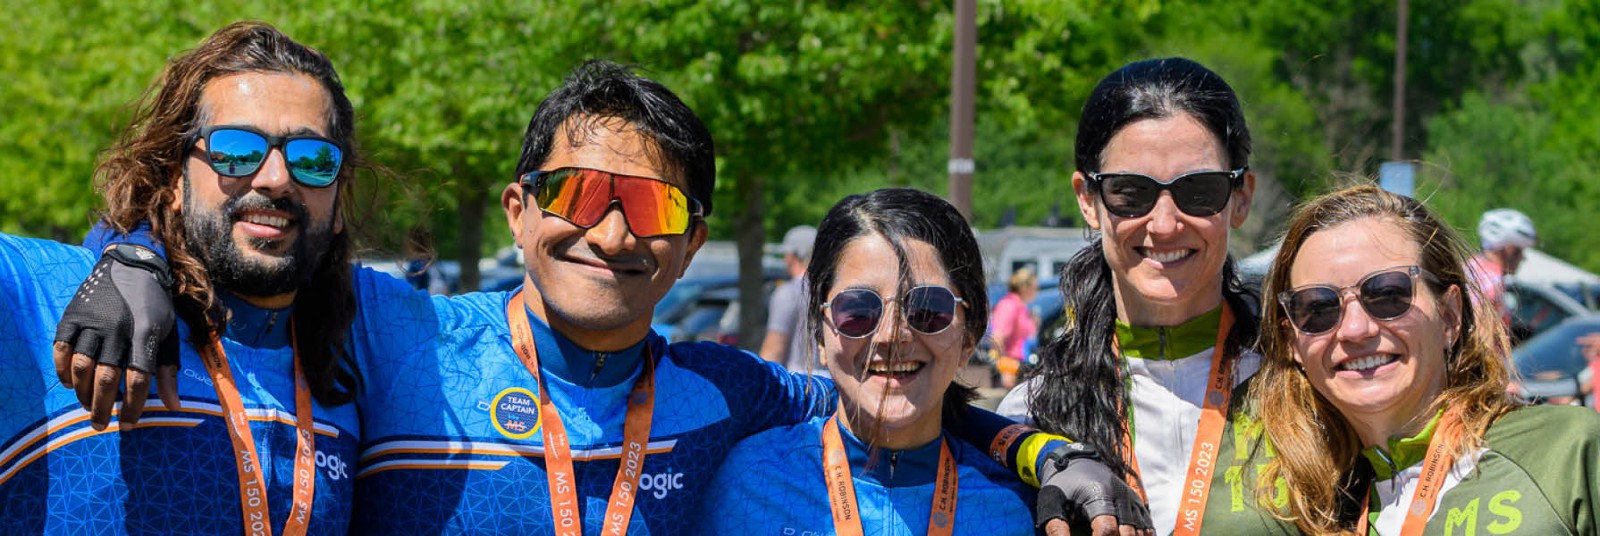 People Standing Together Smiling with Sunglasses On